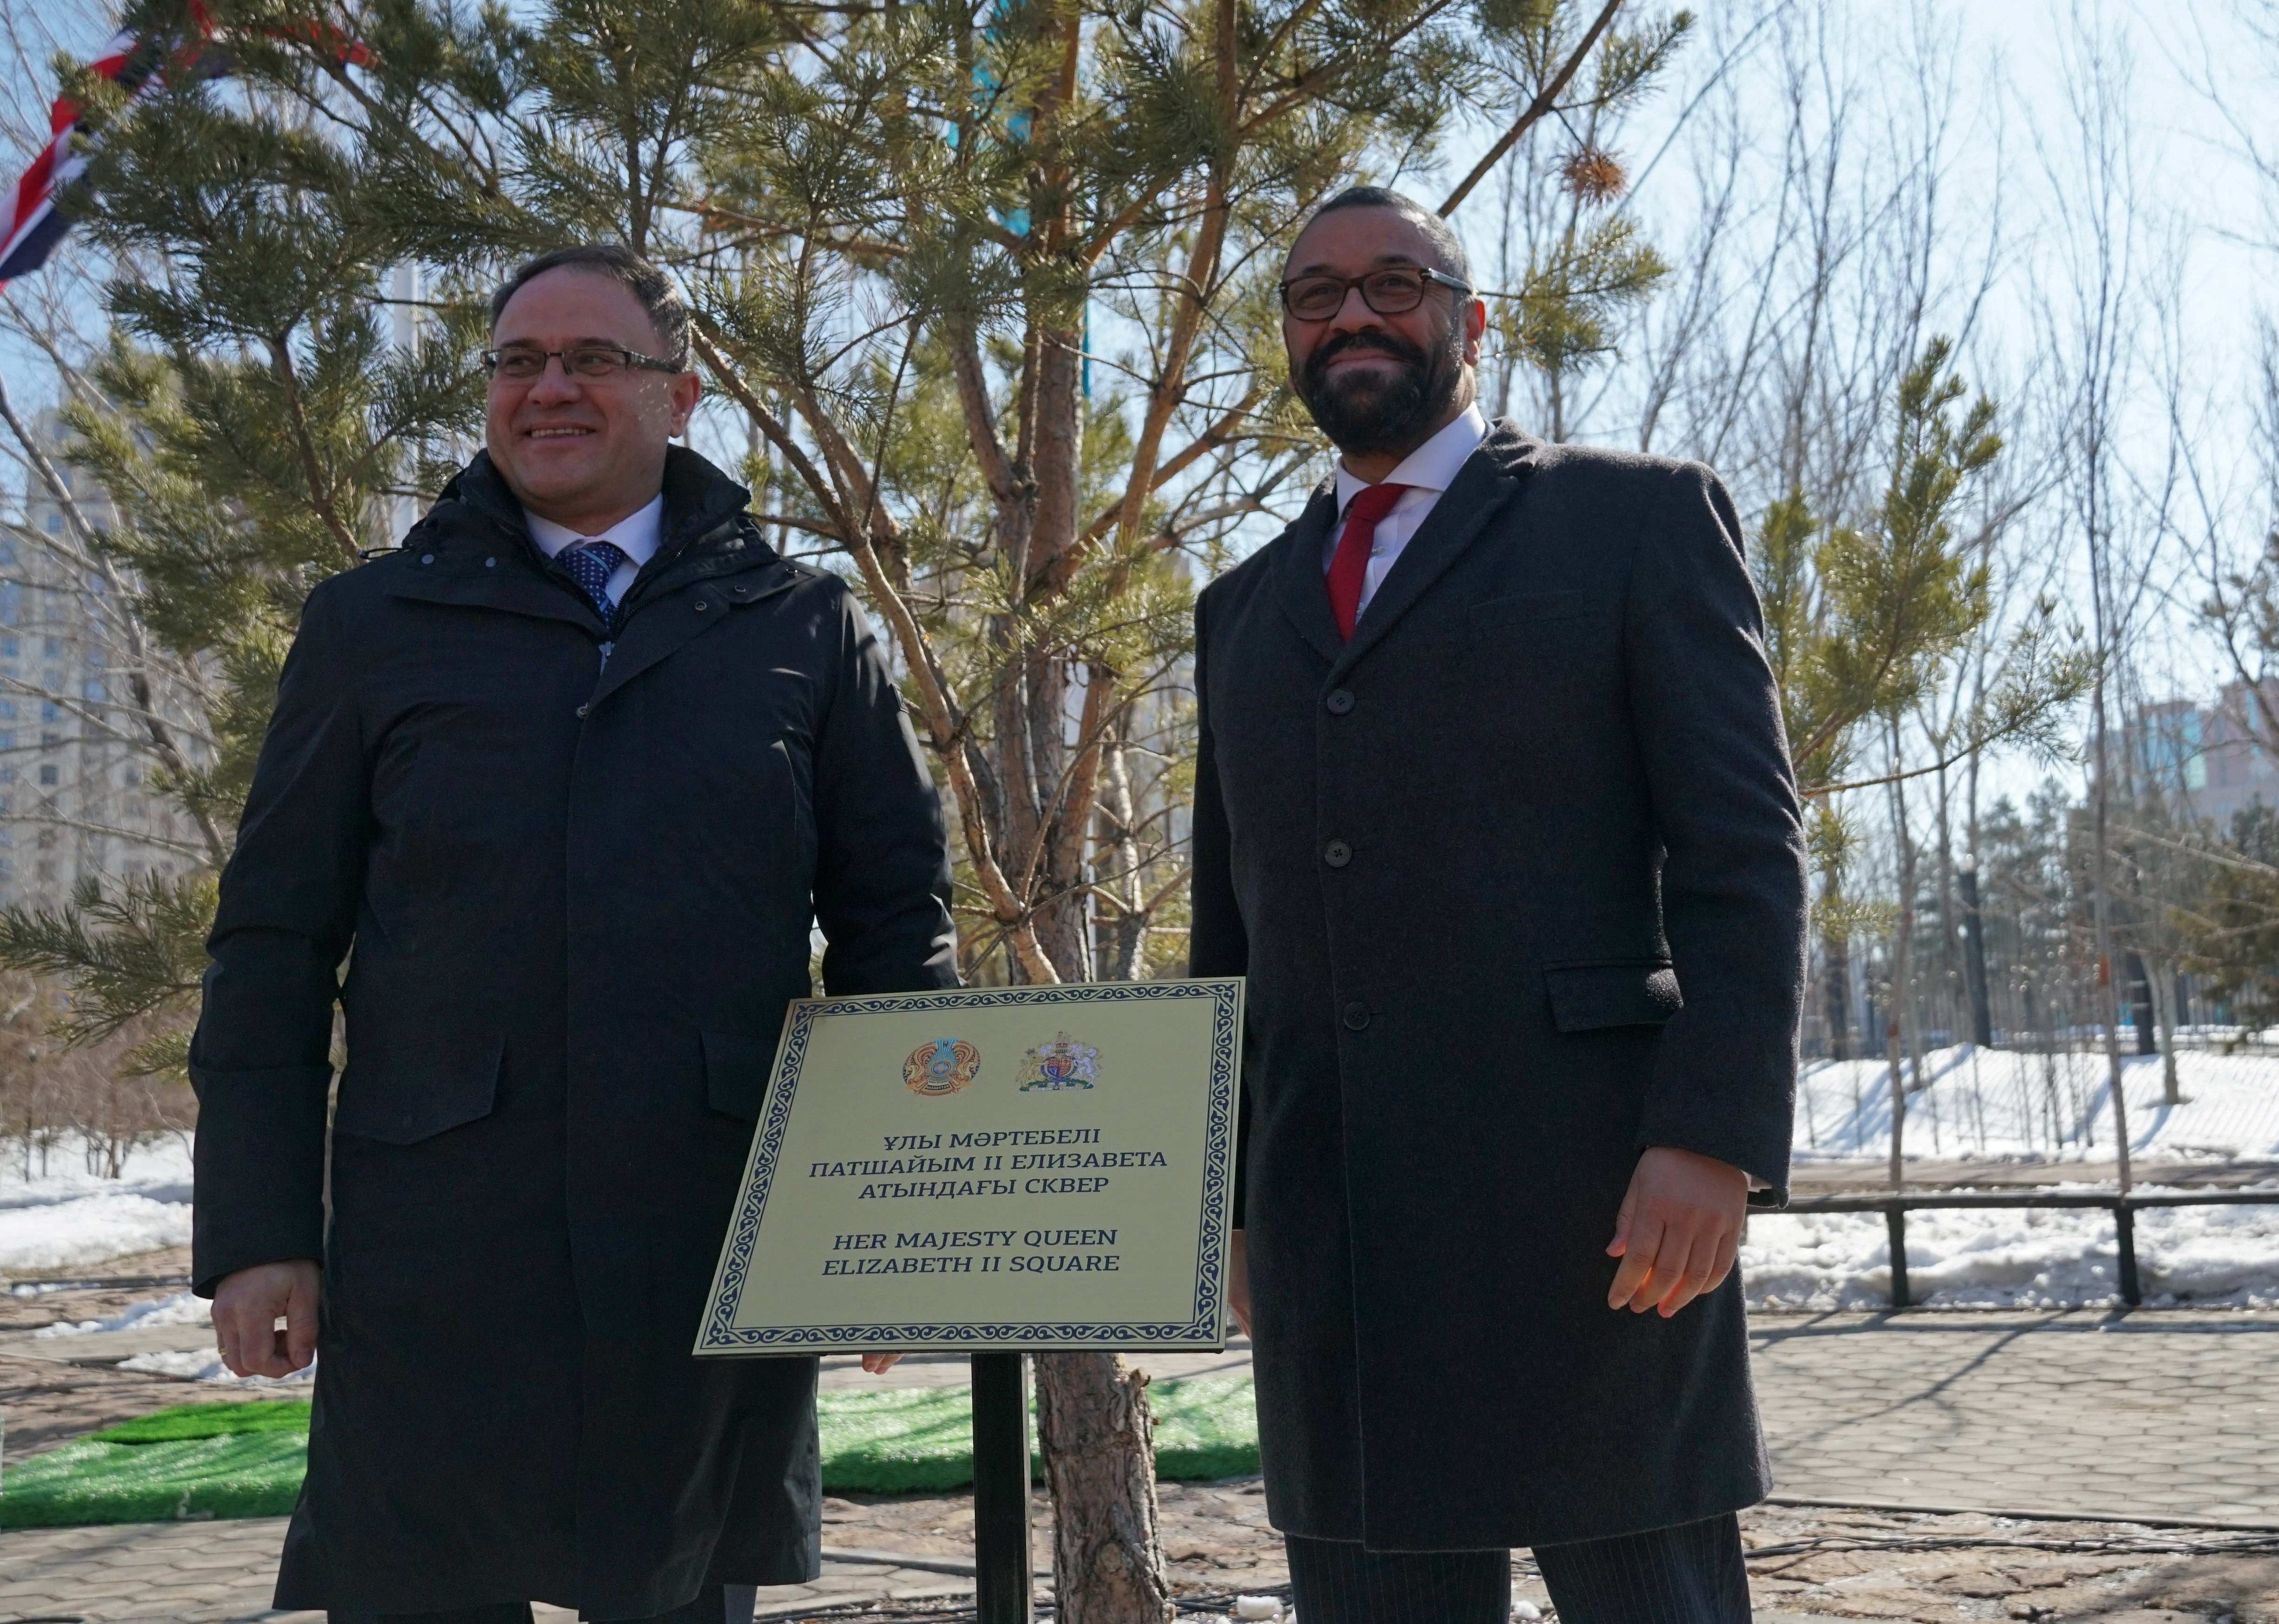 British Foreign Secretary James Cleverly attends the opening ceremony of the new square named after Queen Elizabeth II in Astana